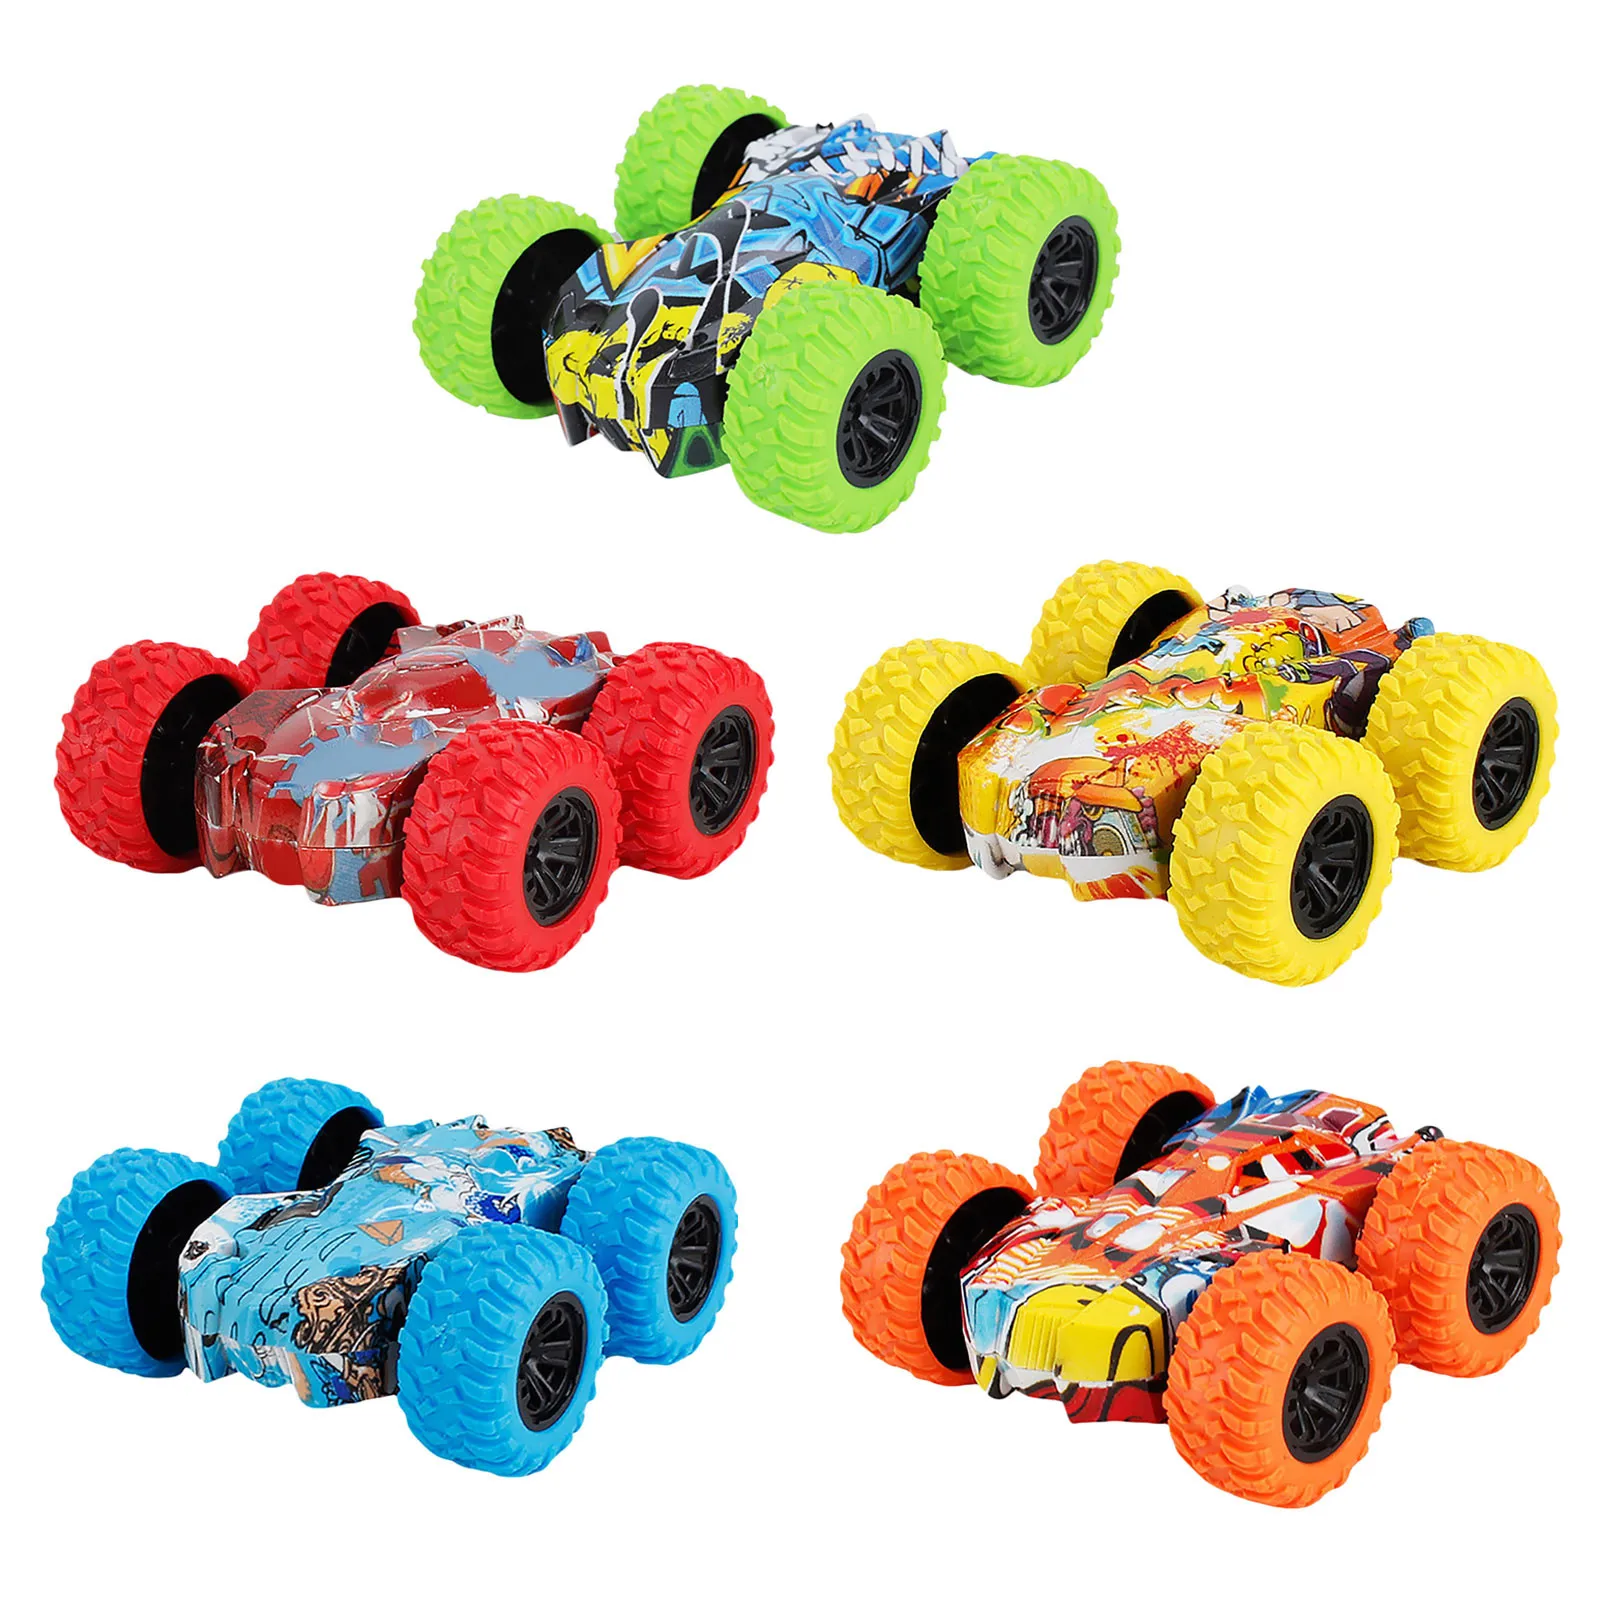 Stunt Graffiti Car Off Road Model Toy Car Best Birthday Party Festival Gift for Kids T20G2 Inertia-Double Side Pull Back Cars Friction Powered Vehicles 